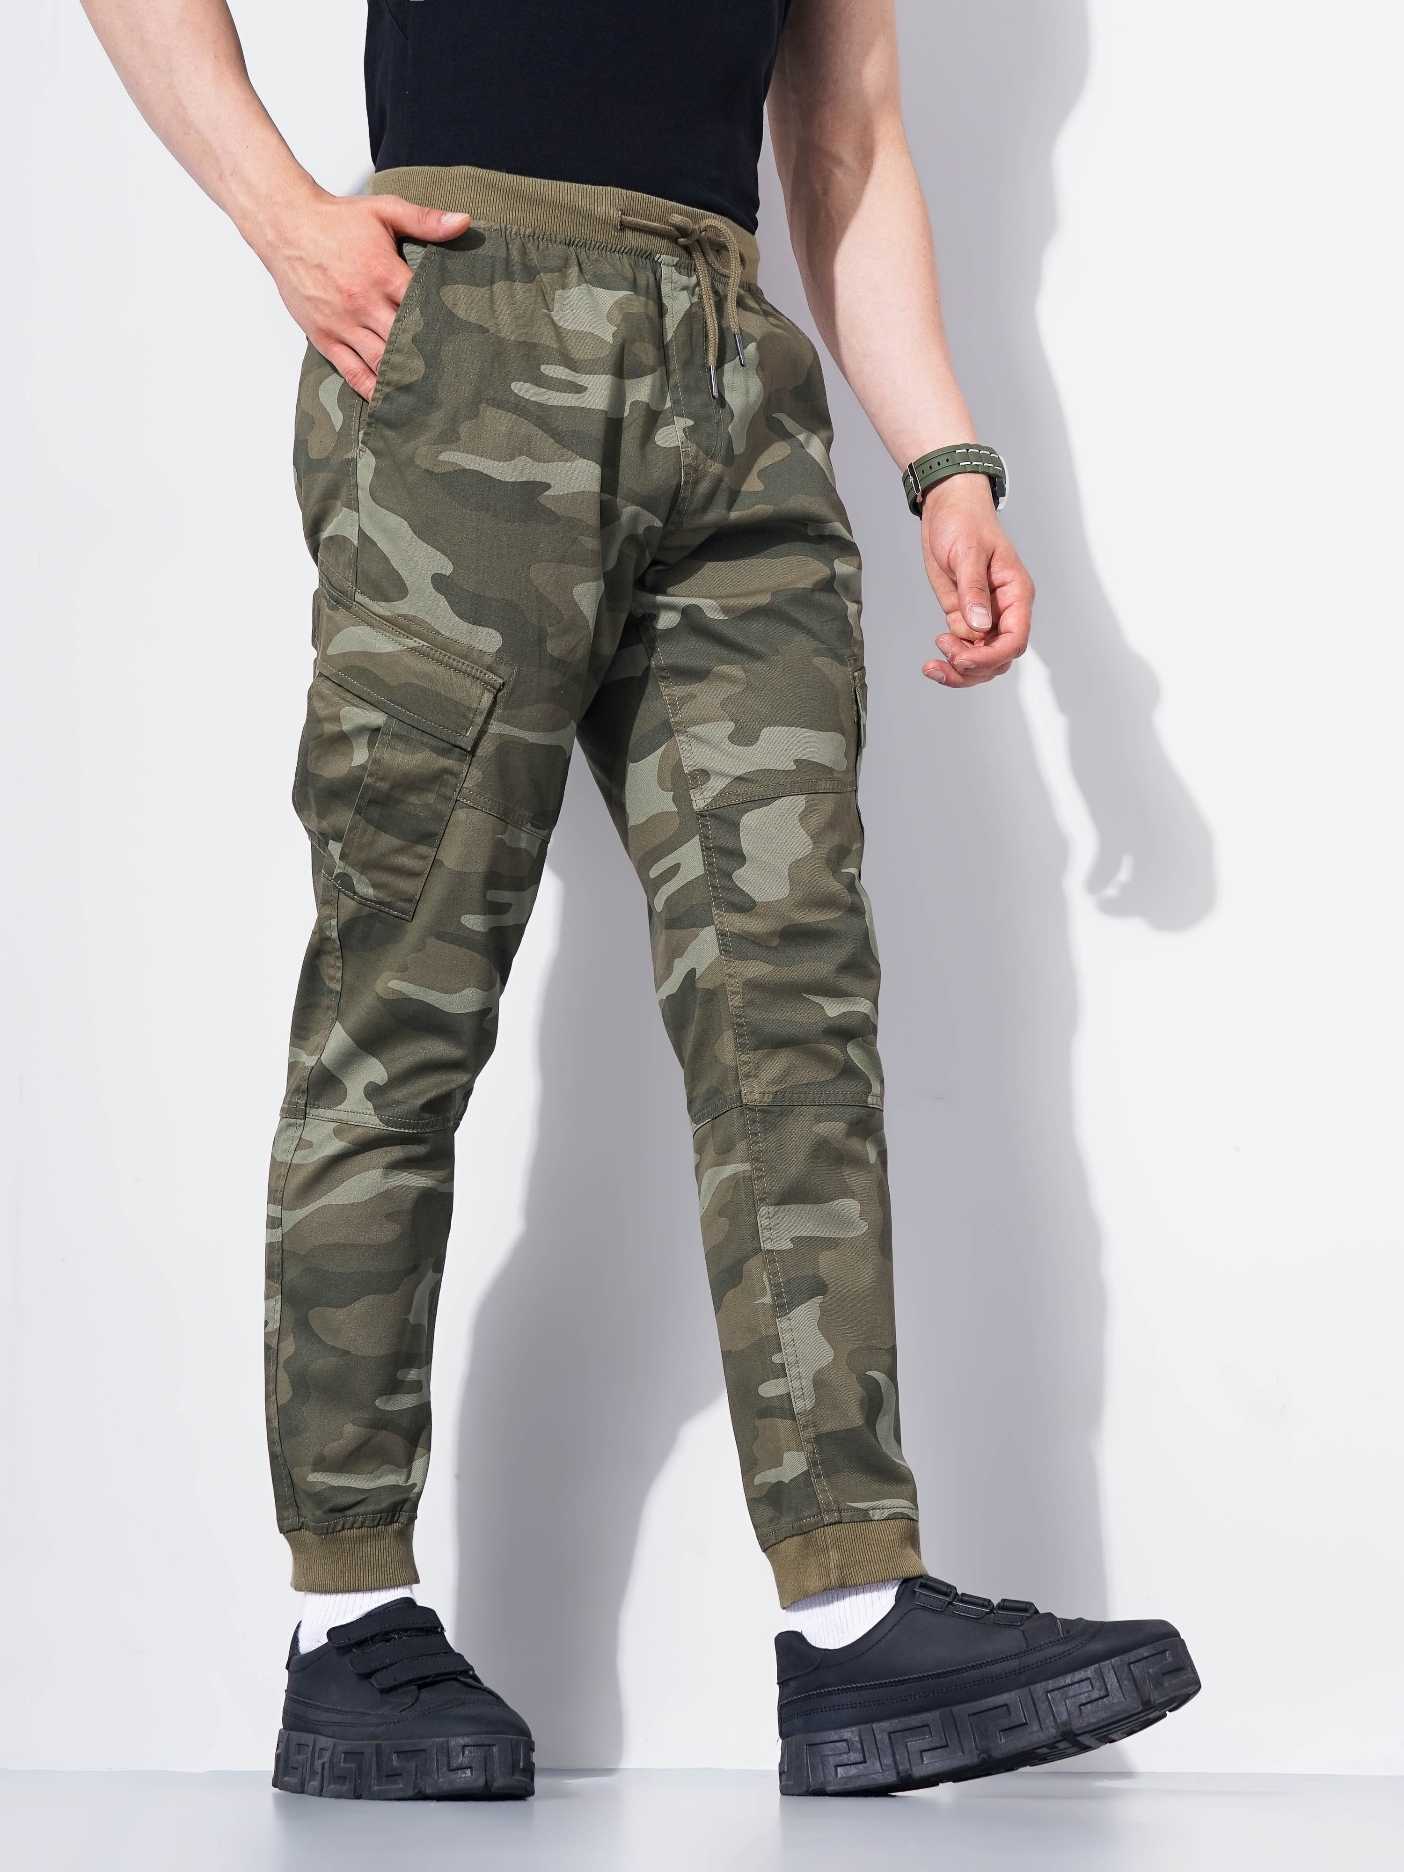 Buy Genuine French 'J. Veyrier' Camouflage Pants / Combat Trousers / Army  Pants W28 L25 Online in India - Etsy